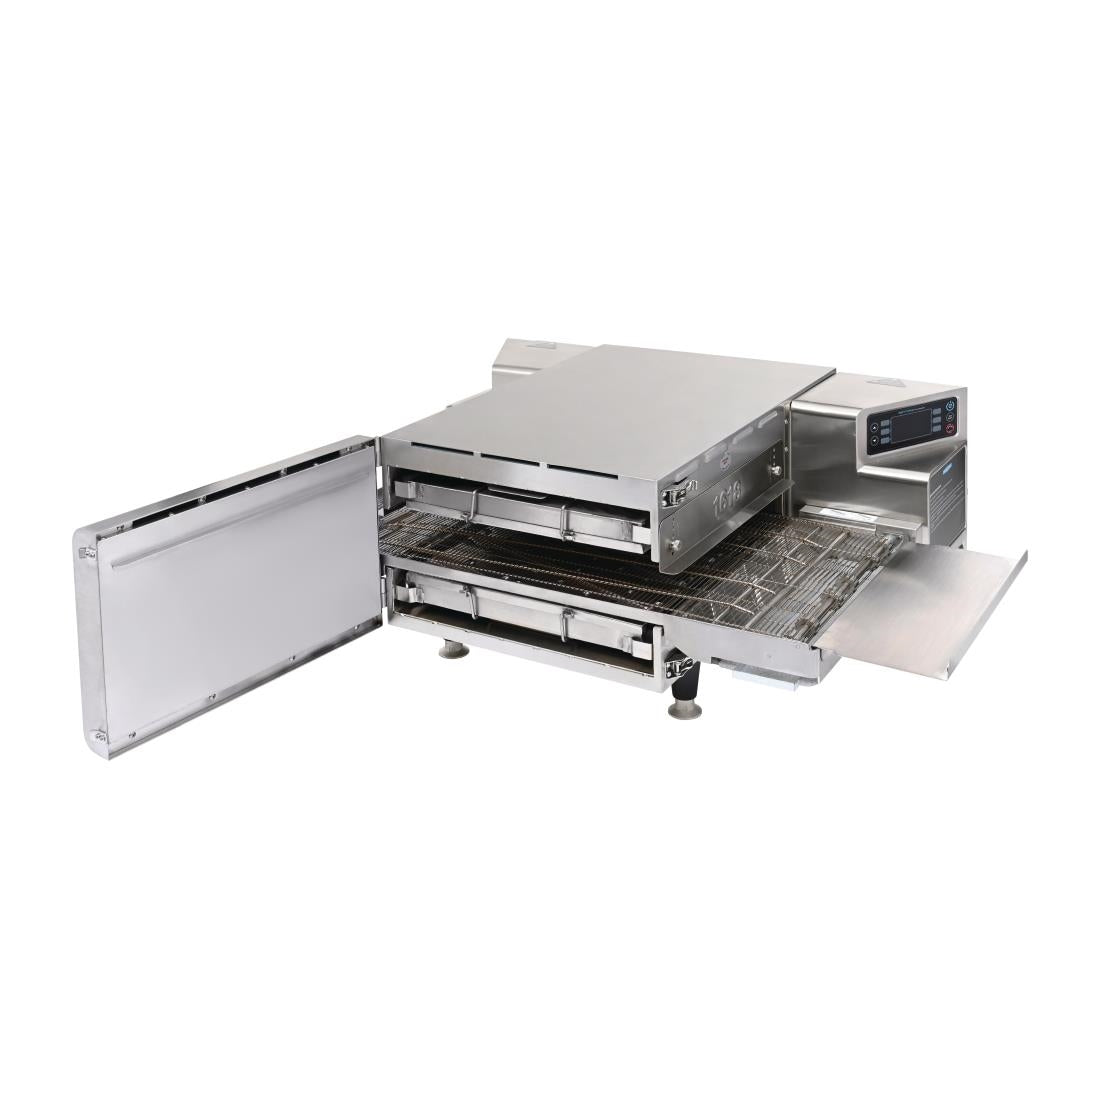 FP880 Turbochef High H Conveyor Oven 1618 JD Catering Equipment Solutions Ltd